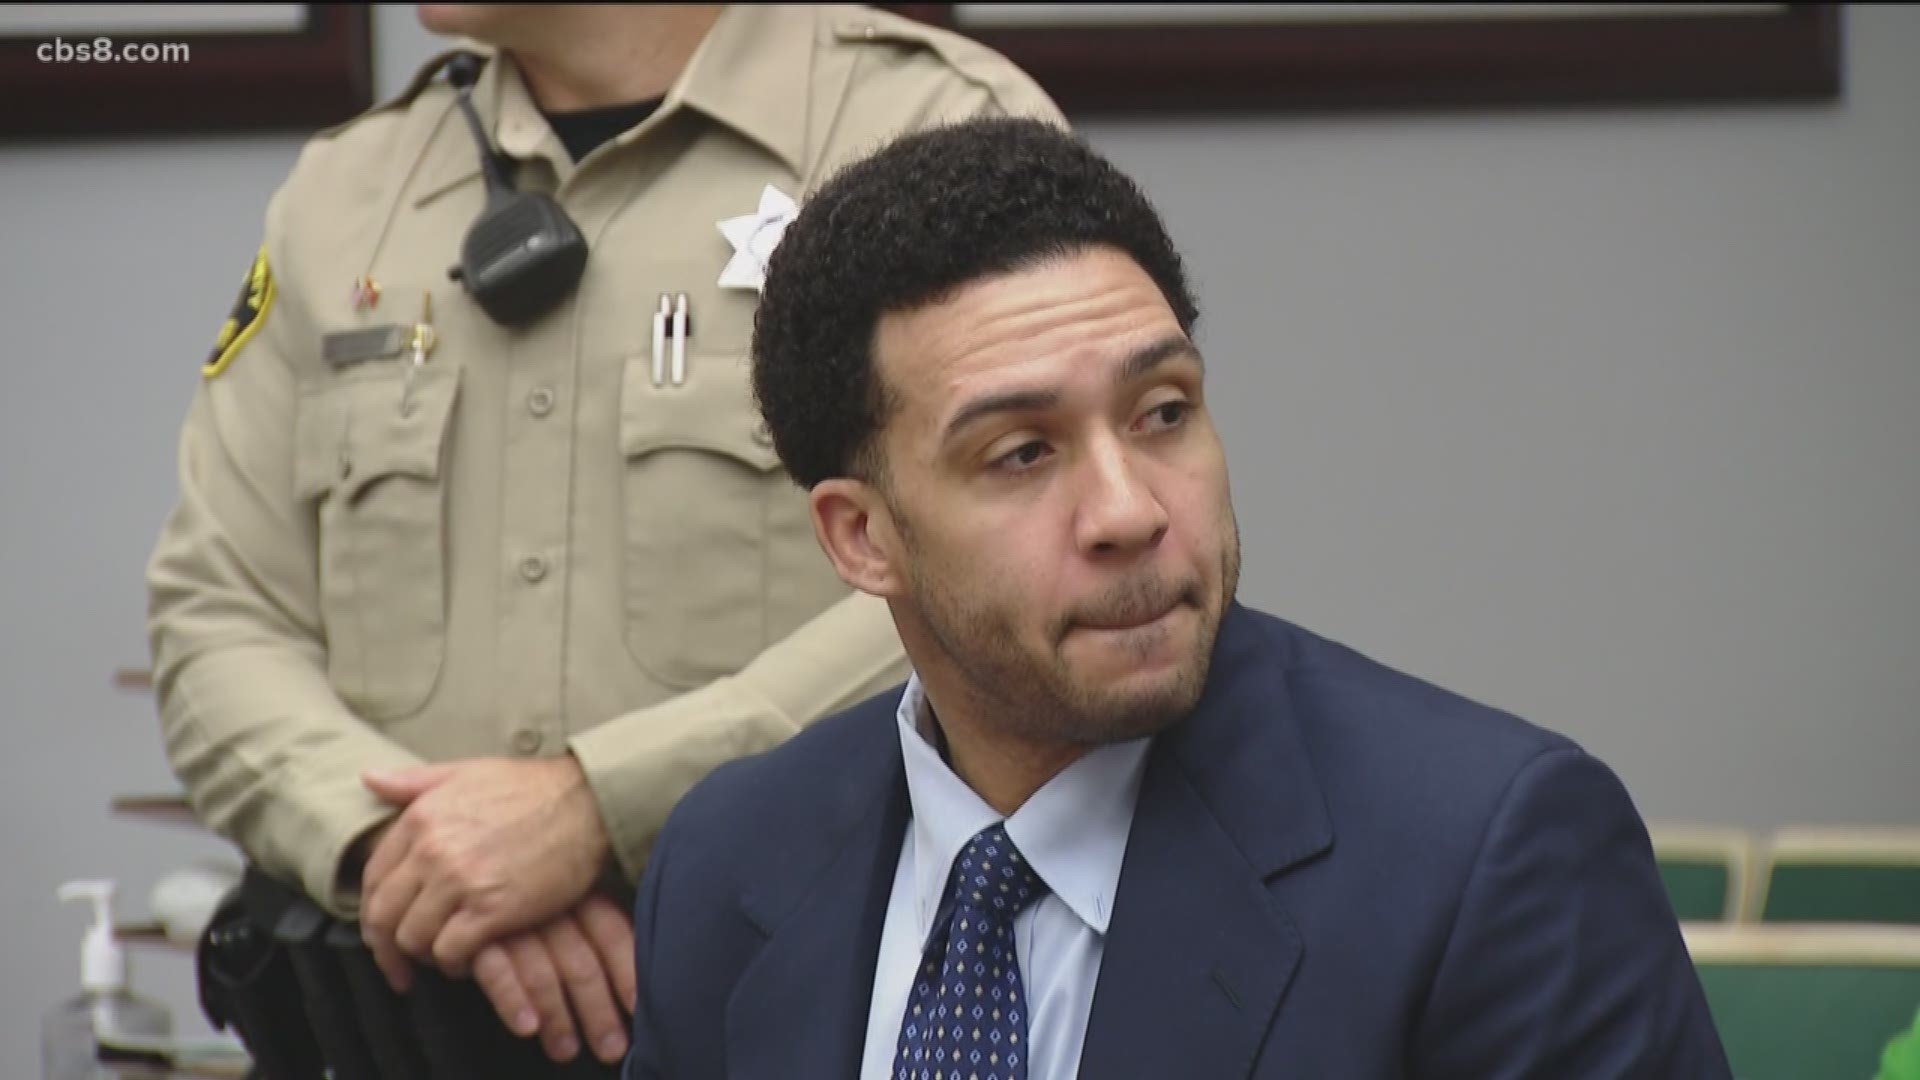 Former NFL player Kellen Winslow II was in court Wednesday for a status conference. At the proceeding a date was set for Winslow’s second trial.